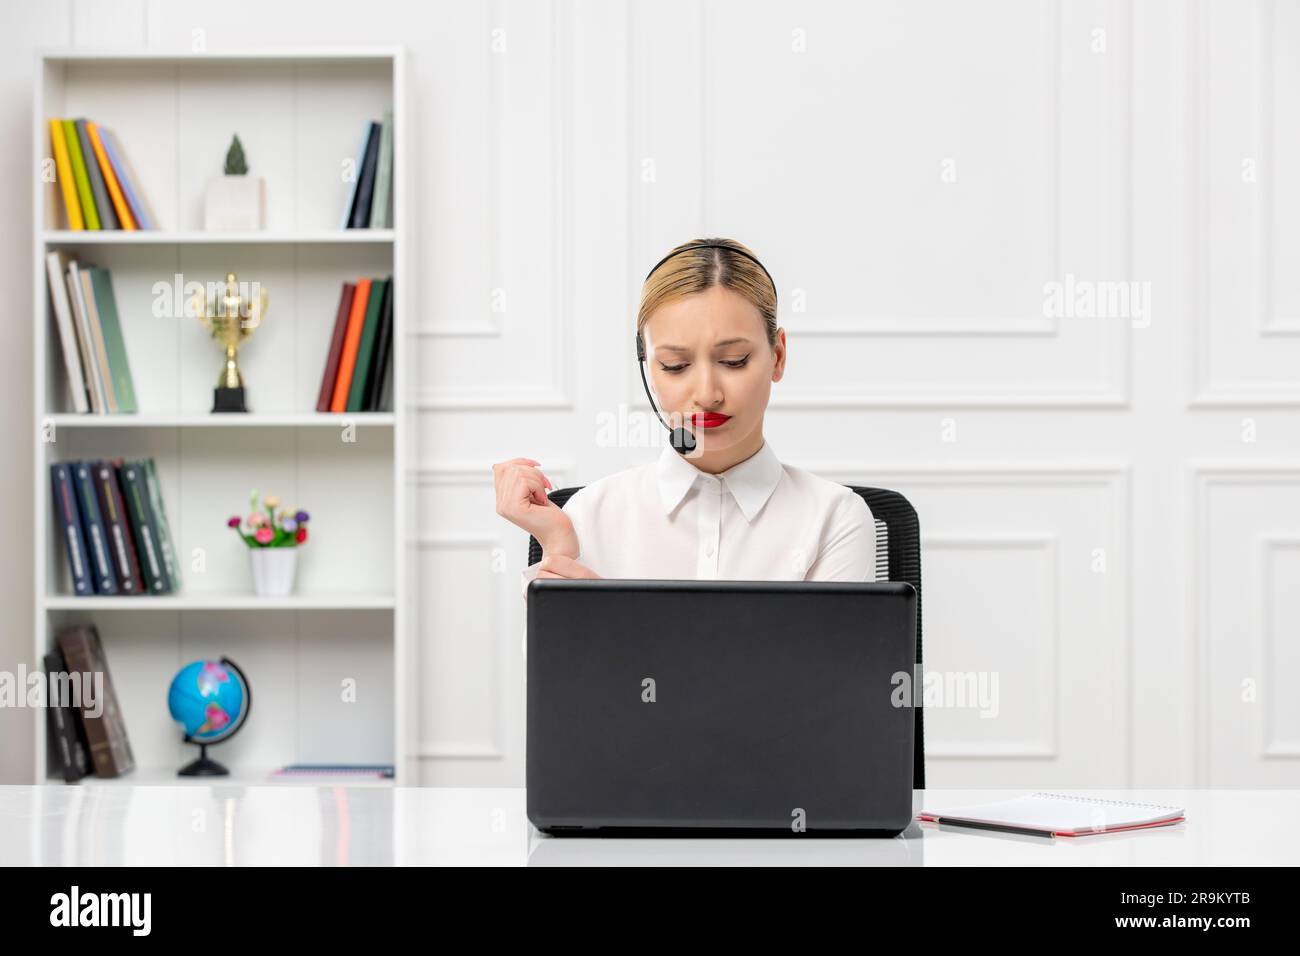 customer service cute woman in white shirt with headset and computer confused looking down Stock Photo